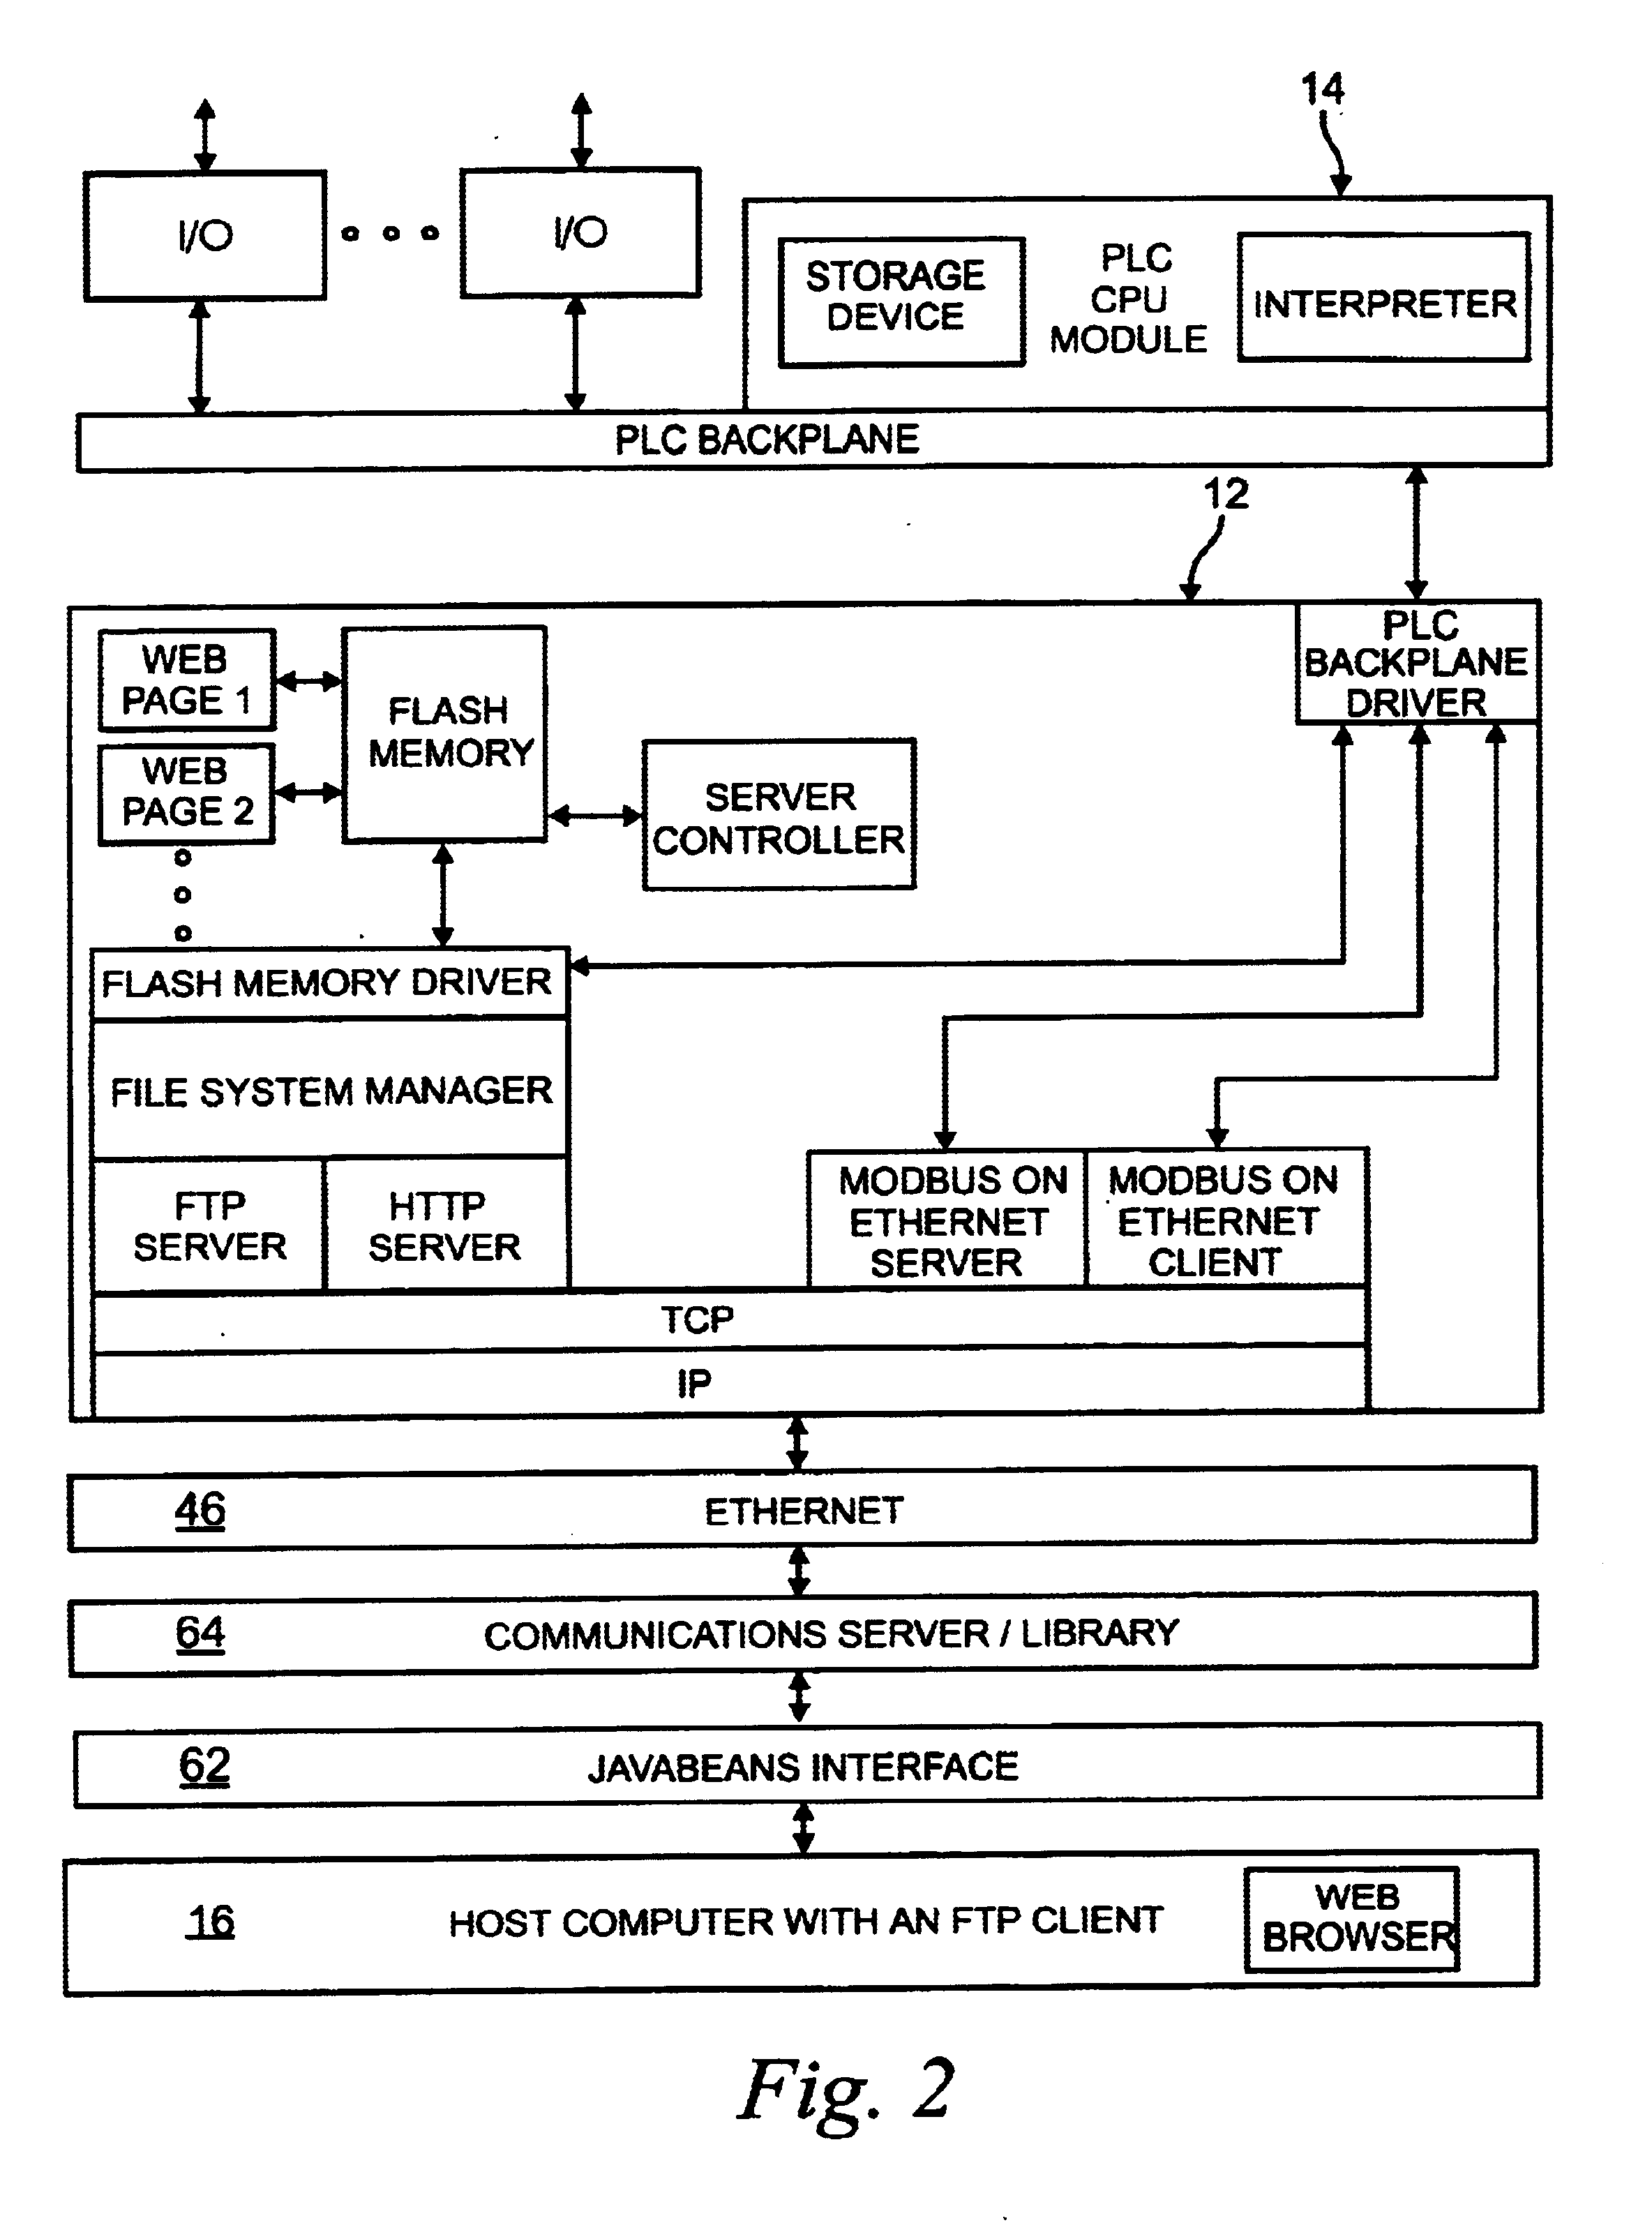 Interface to a programmable logic controller